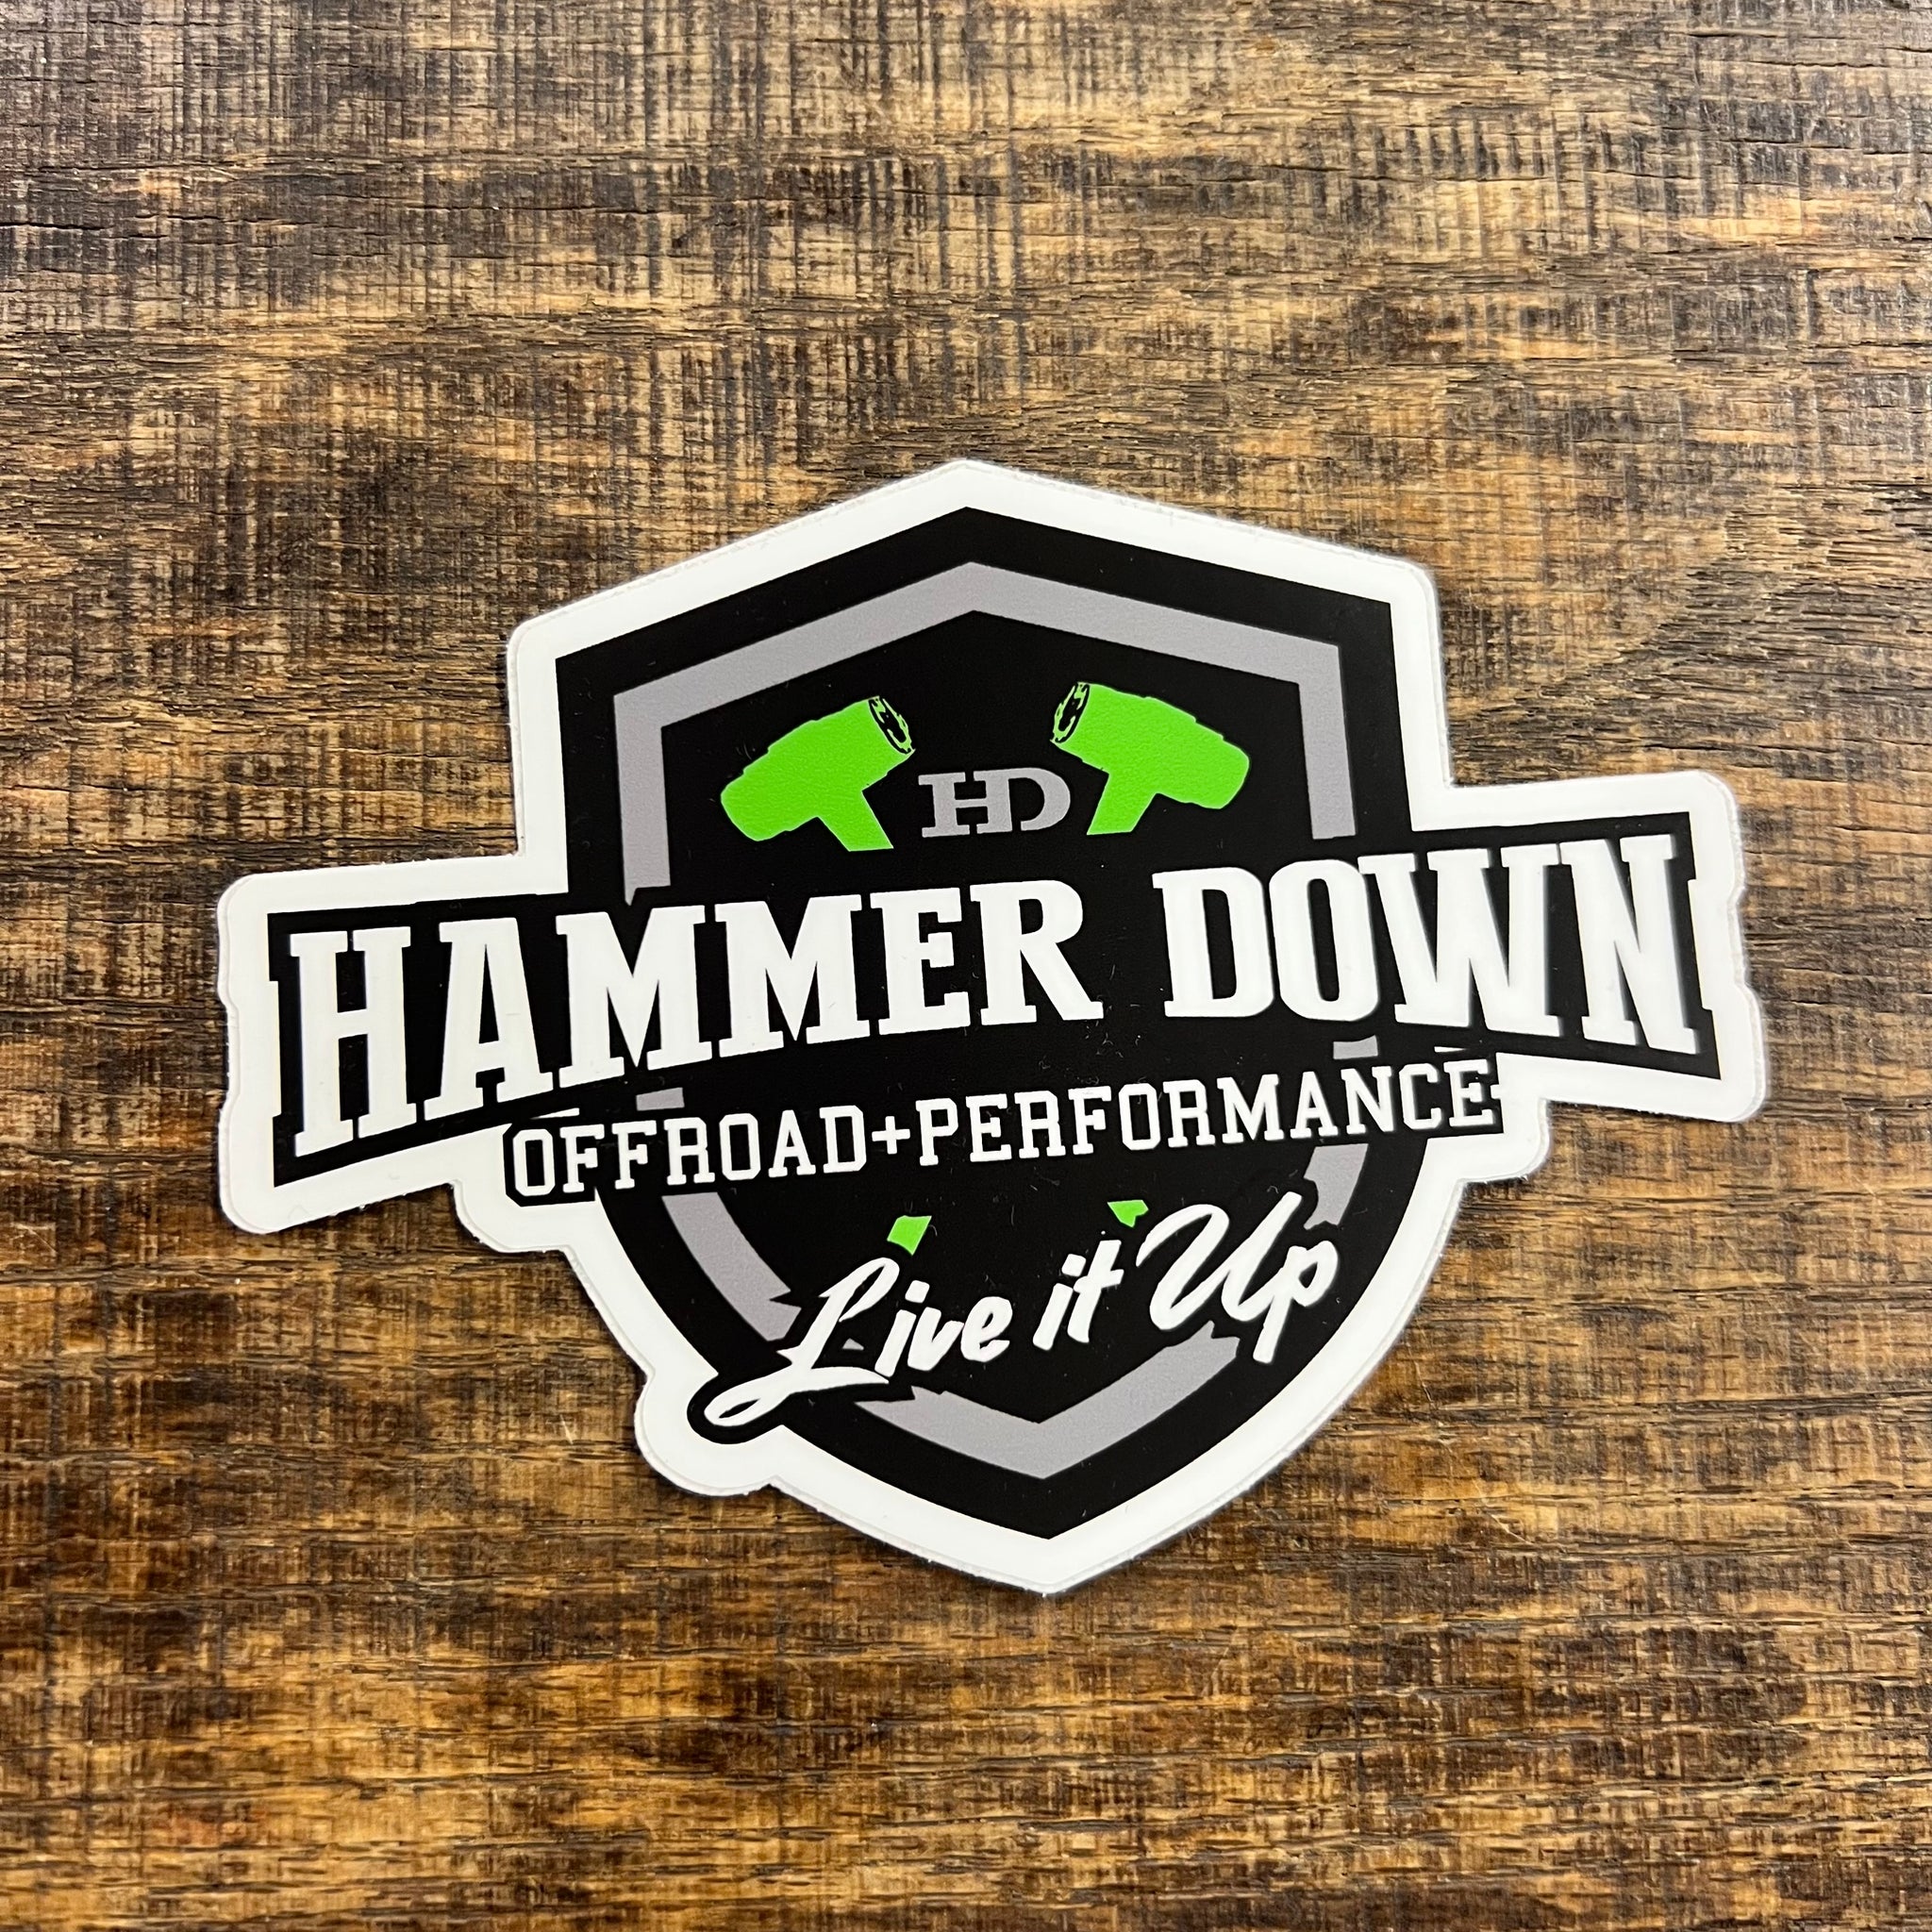 Hammer Down "Off-Road Performance" Sticker - Black White And Green